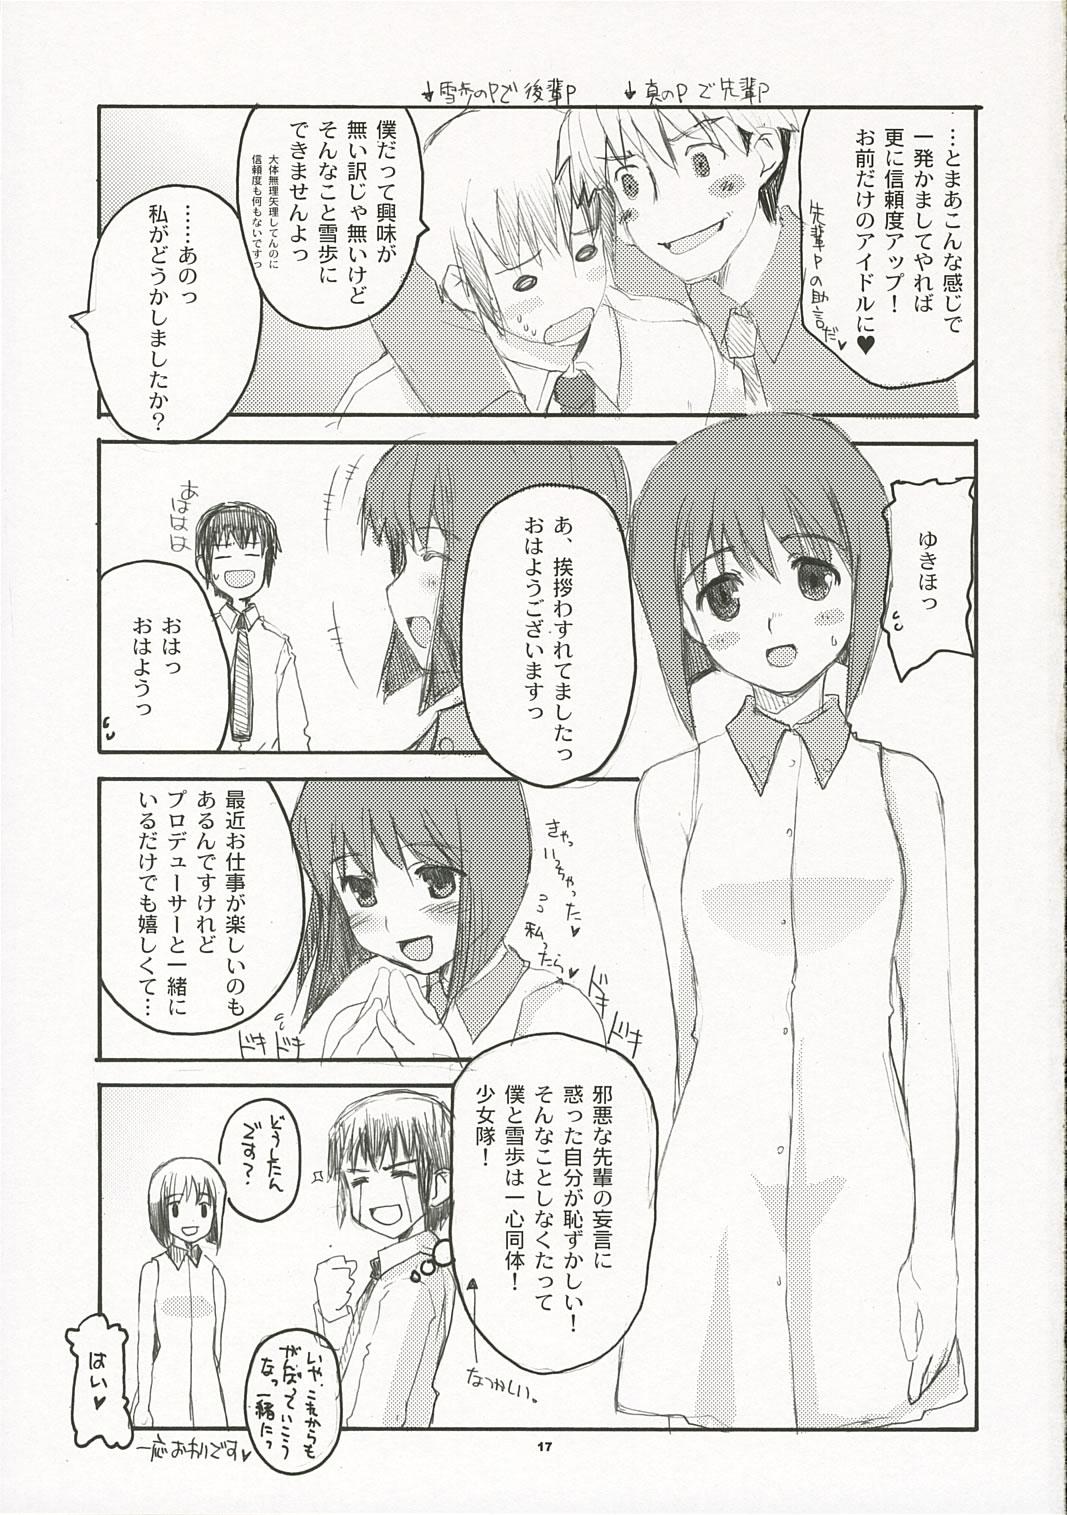 Old Vs Young ANGEL INTERCEPTOR - The idolmaster Aunt - Page 16